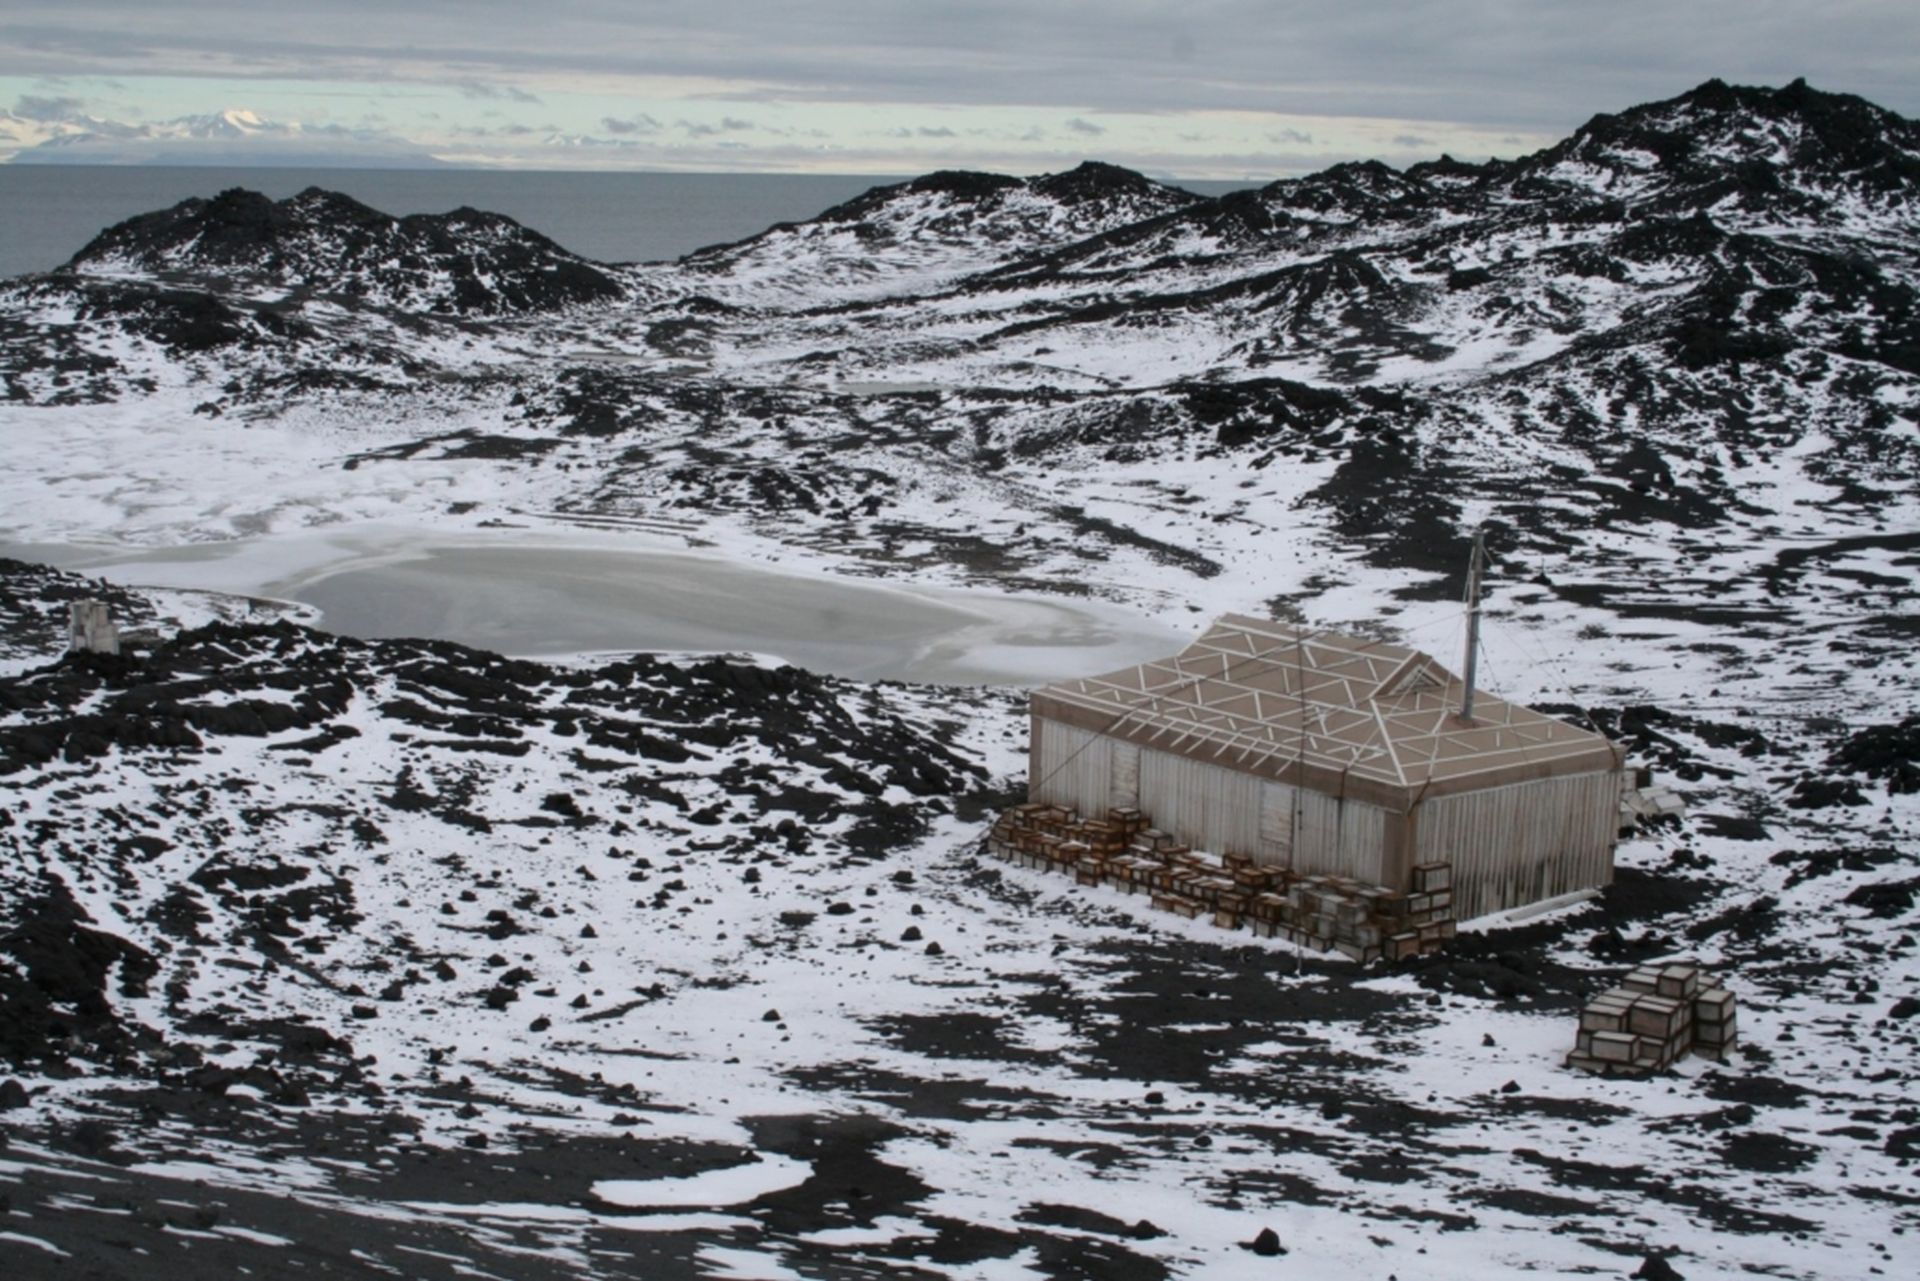 Shackleton’s Nimrod hut sits on an ice-free area of rock at Cape Royds, next to Pony Lake.